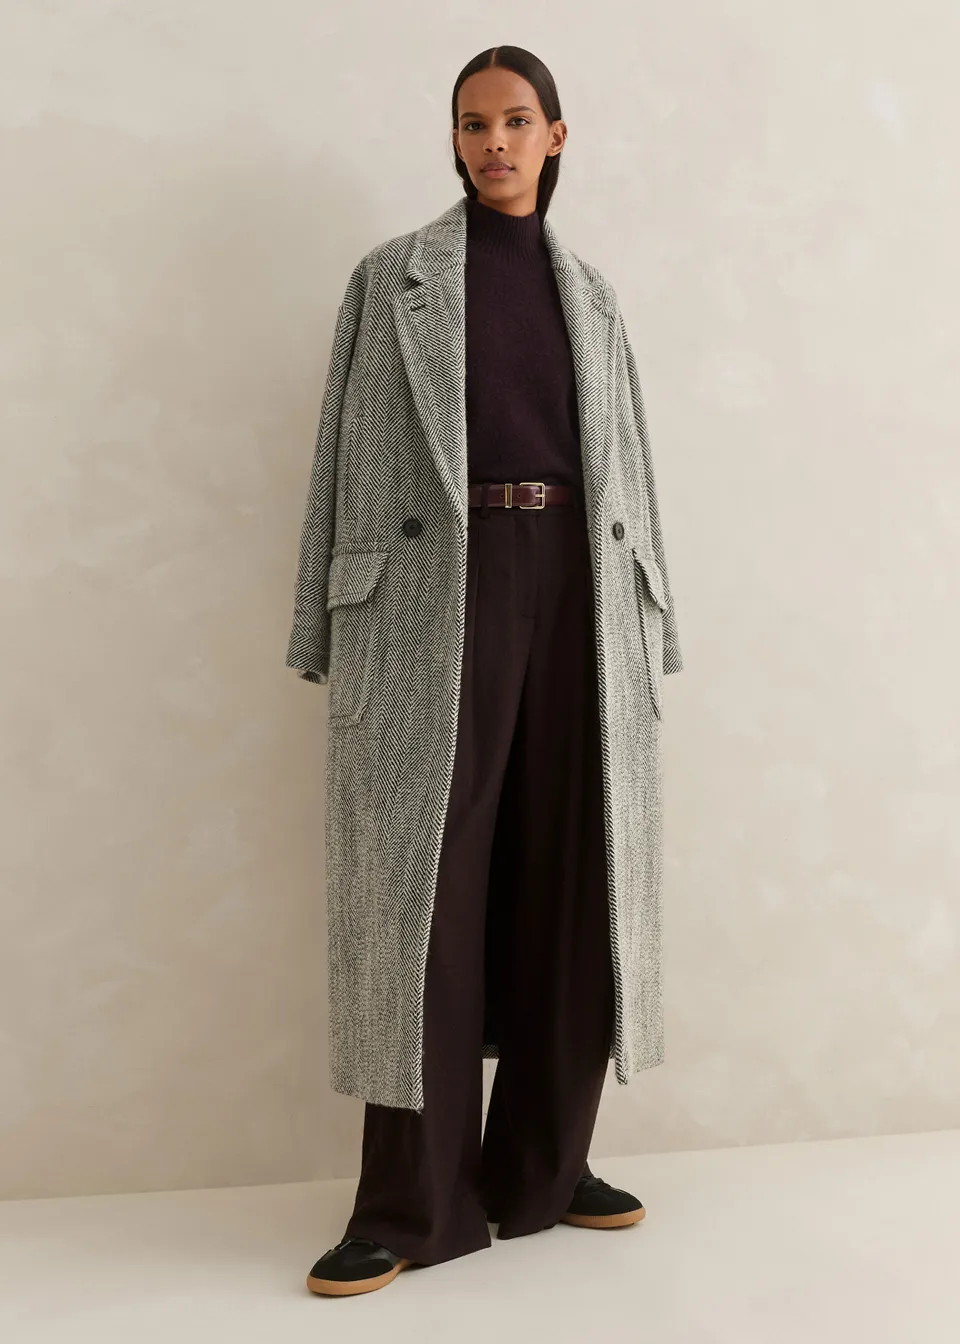 Me + Em herringbone weave in a monochrome black-and-white palette creates a textural grey shade on this wool-blend coat designed with two different neckline options.